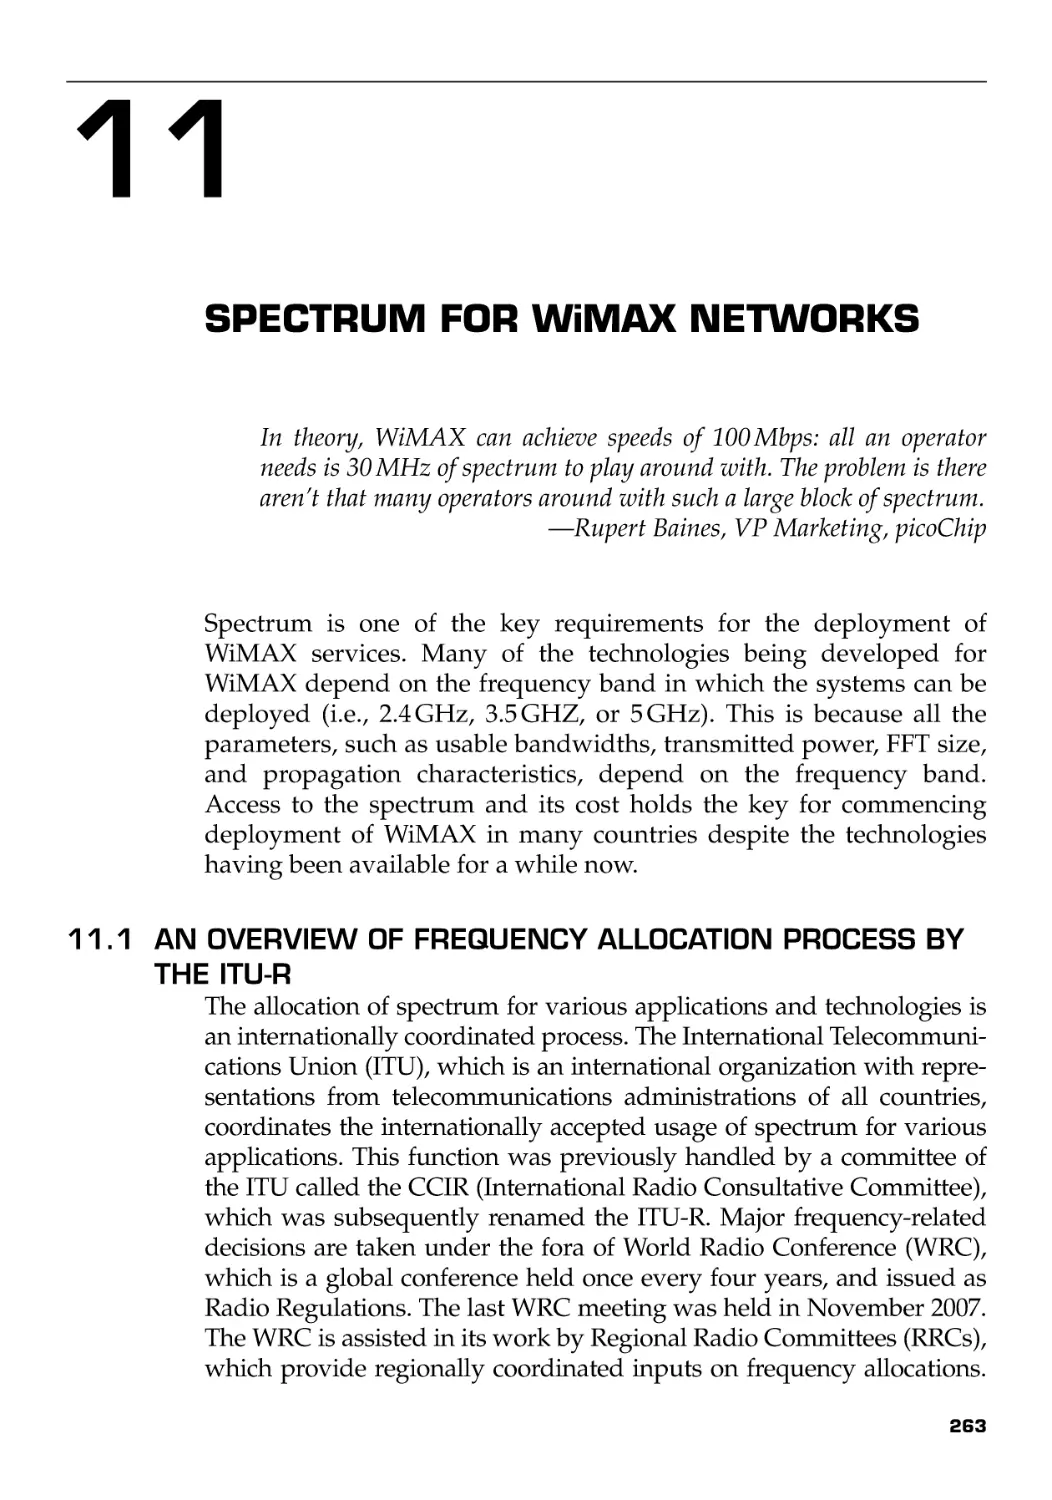 Chapter 11
11.1 An Overview of Frequency Allocation Process by the ITU-R